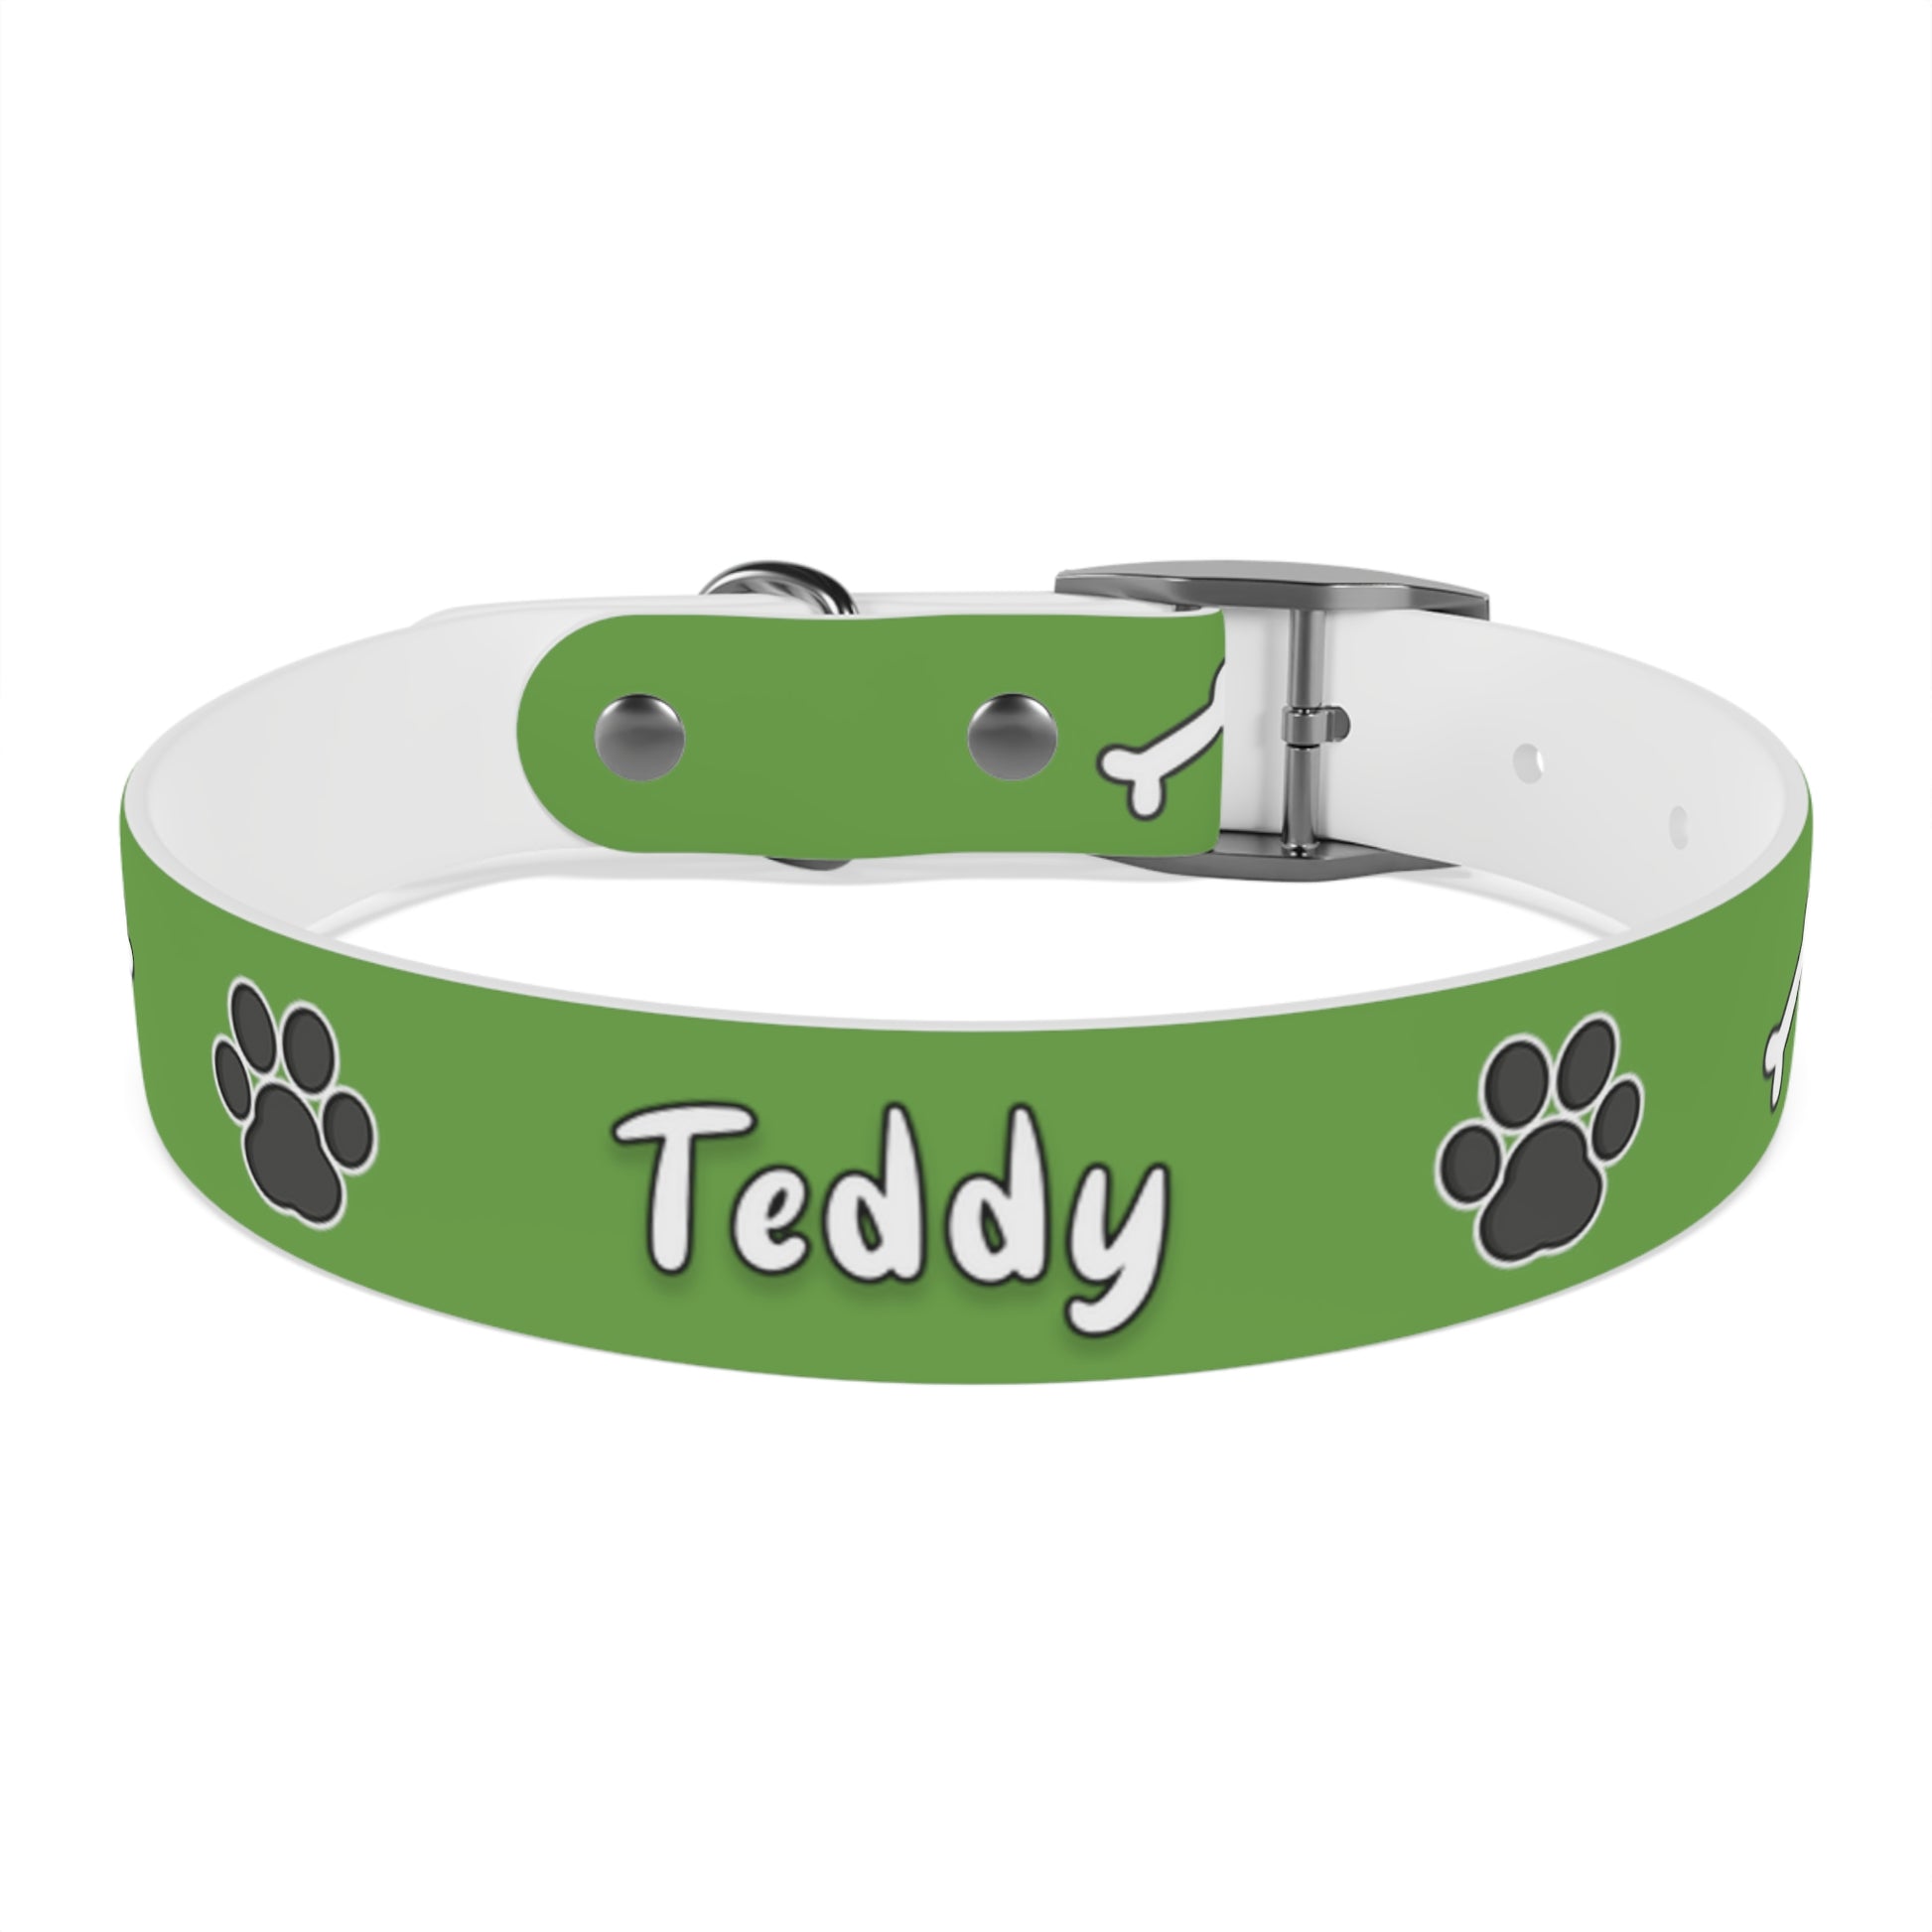 a dog collar with dog bones and paws design. The name of the dog is in the middle of the pet collar.  The dog collar color is green